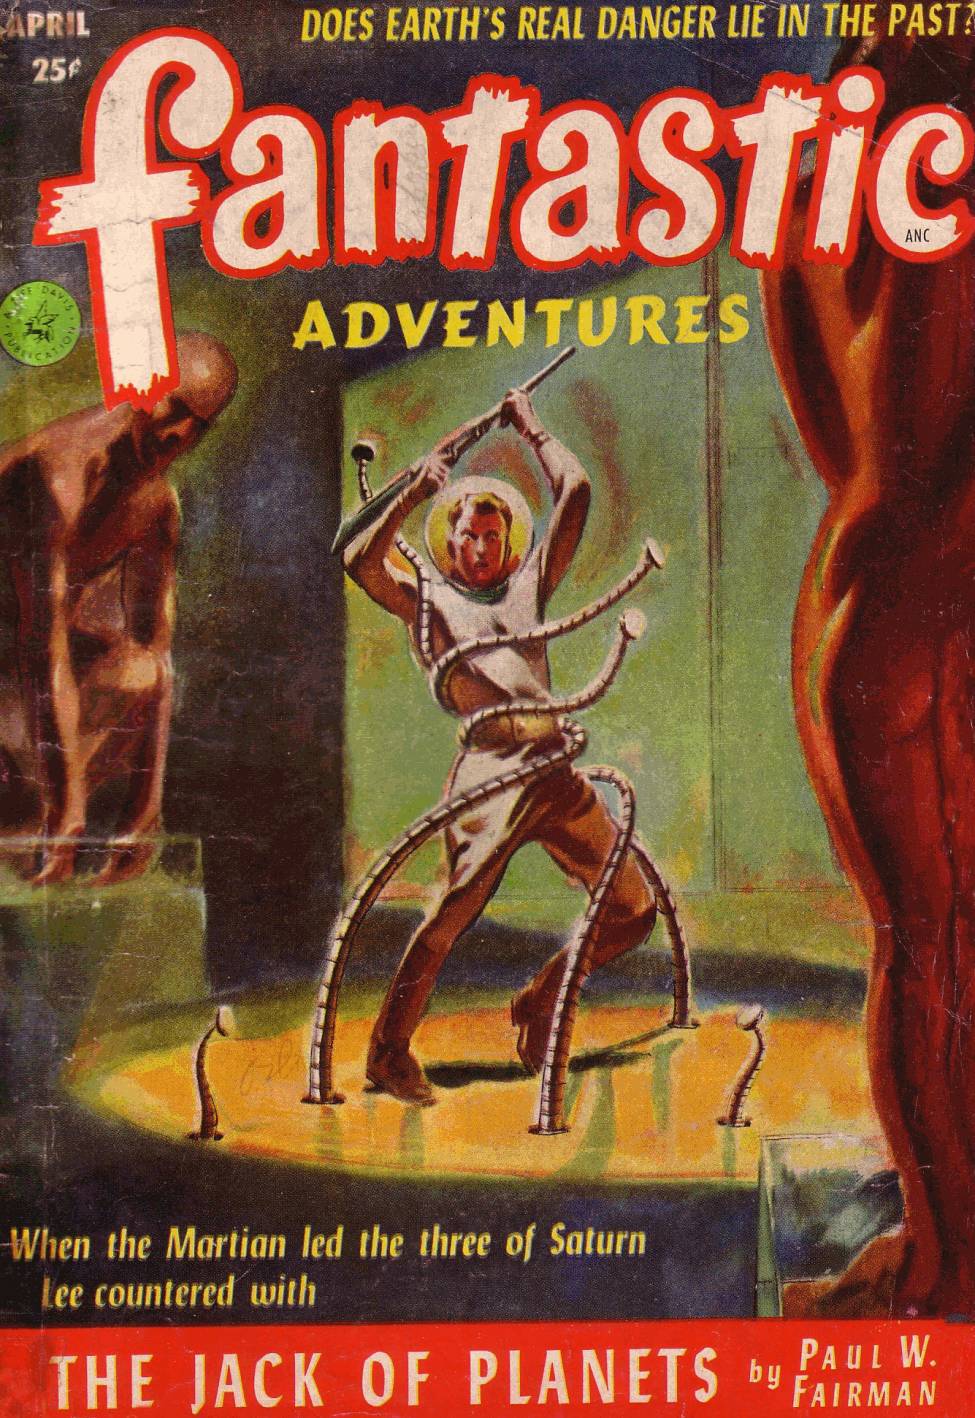 Comic Book Cover For Fantastic Adventures v14 4 - The Jack of Planets - Paul W. Fairman